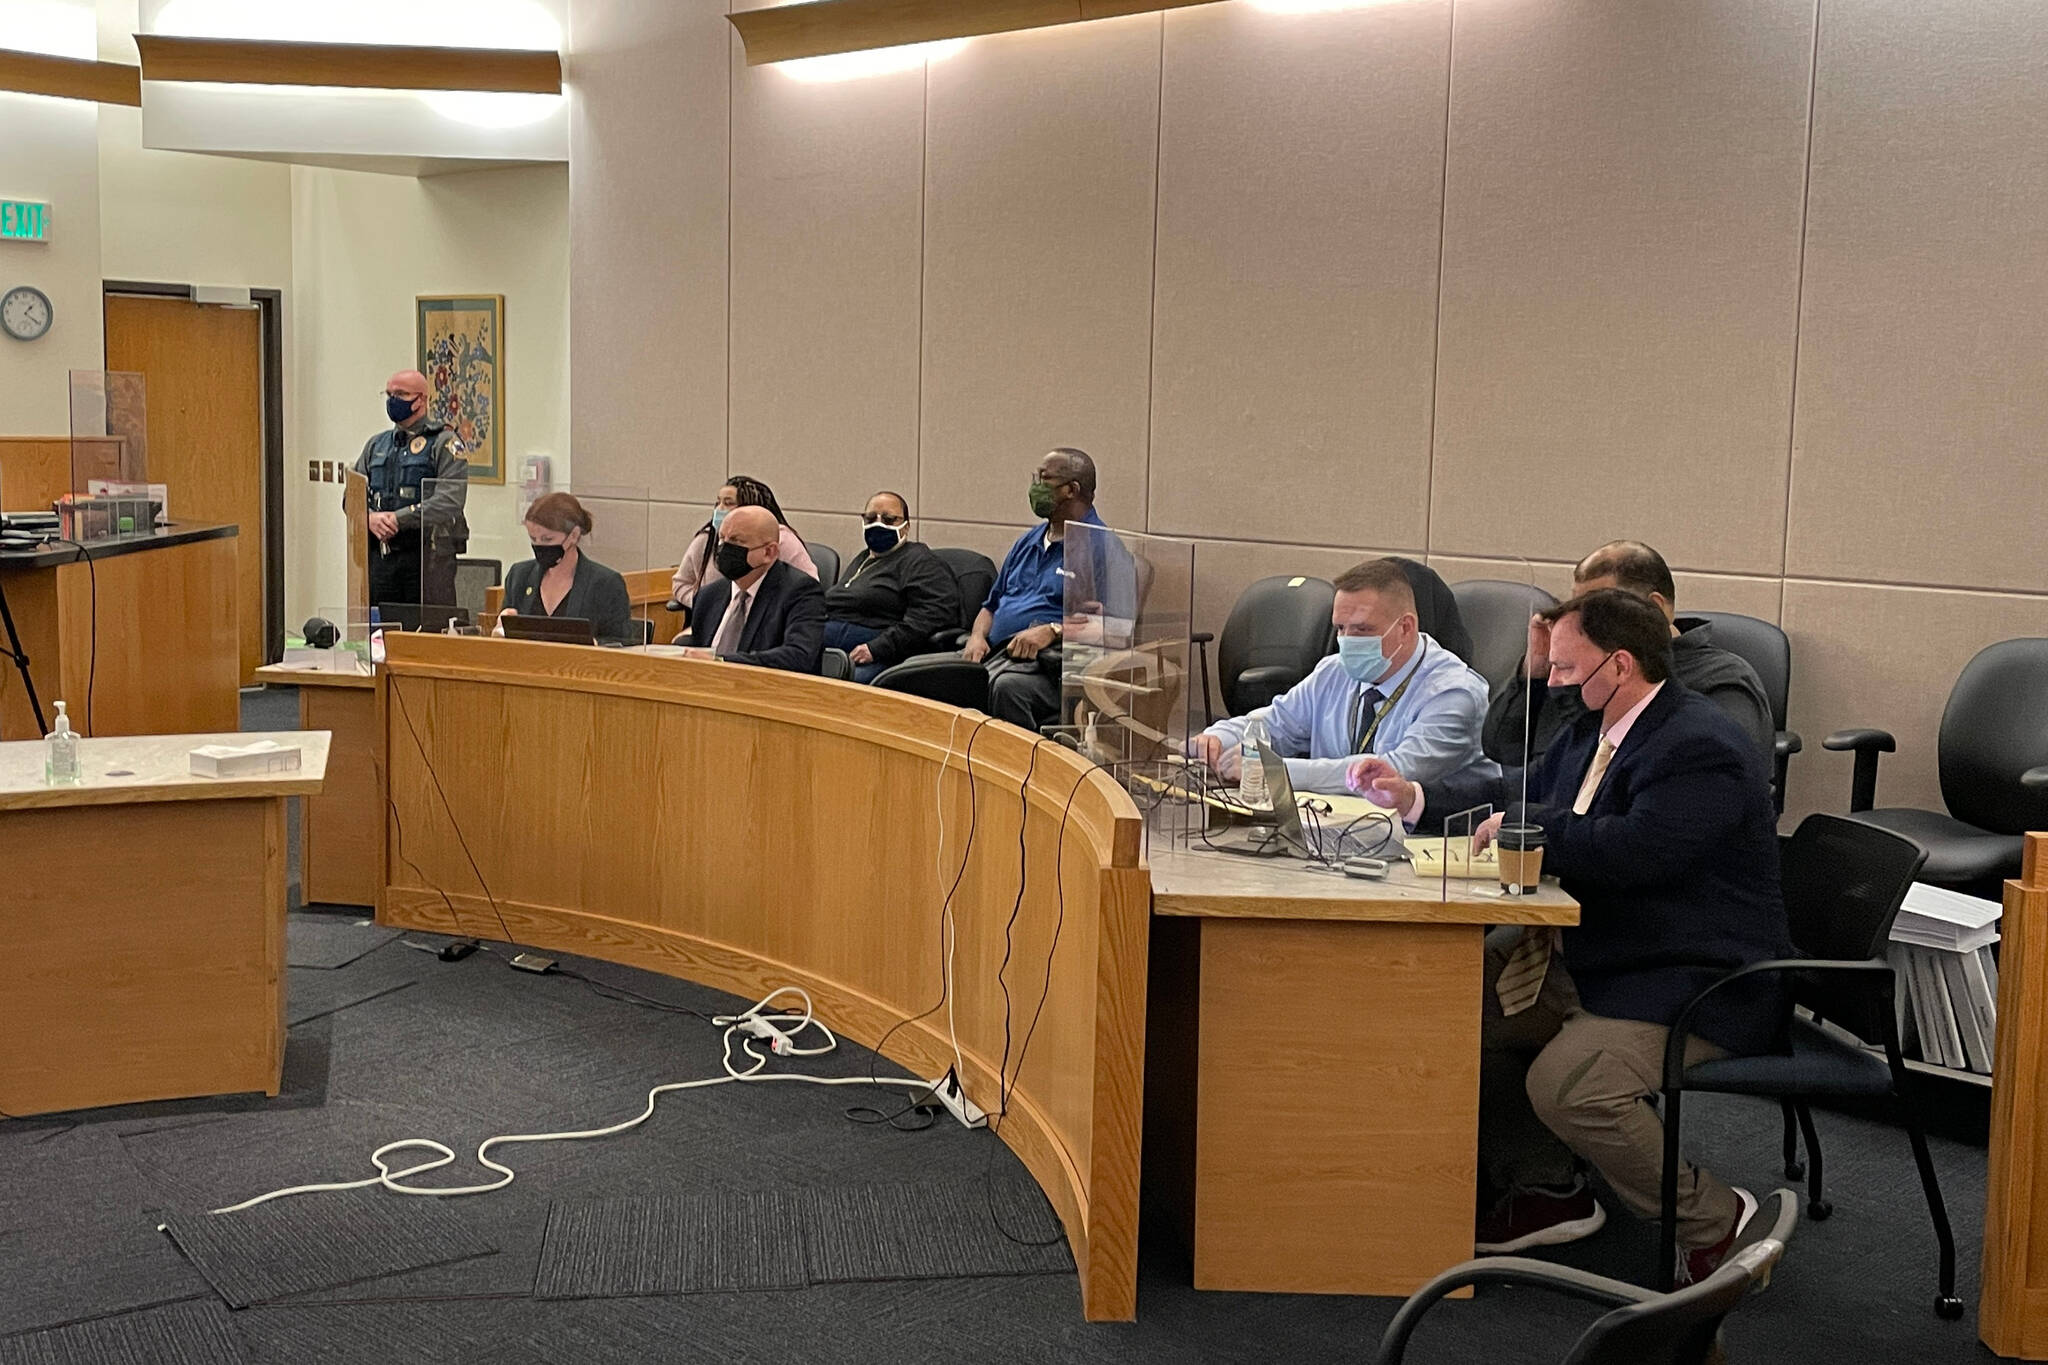 Members of the prosecution and defense, including defendant John Stapleton, sit on Jan. 13 during a trial for a 2018 killing. (Michael S. Lockett / Juneau Empire File)